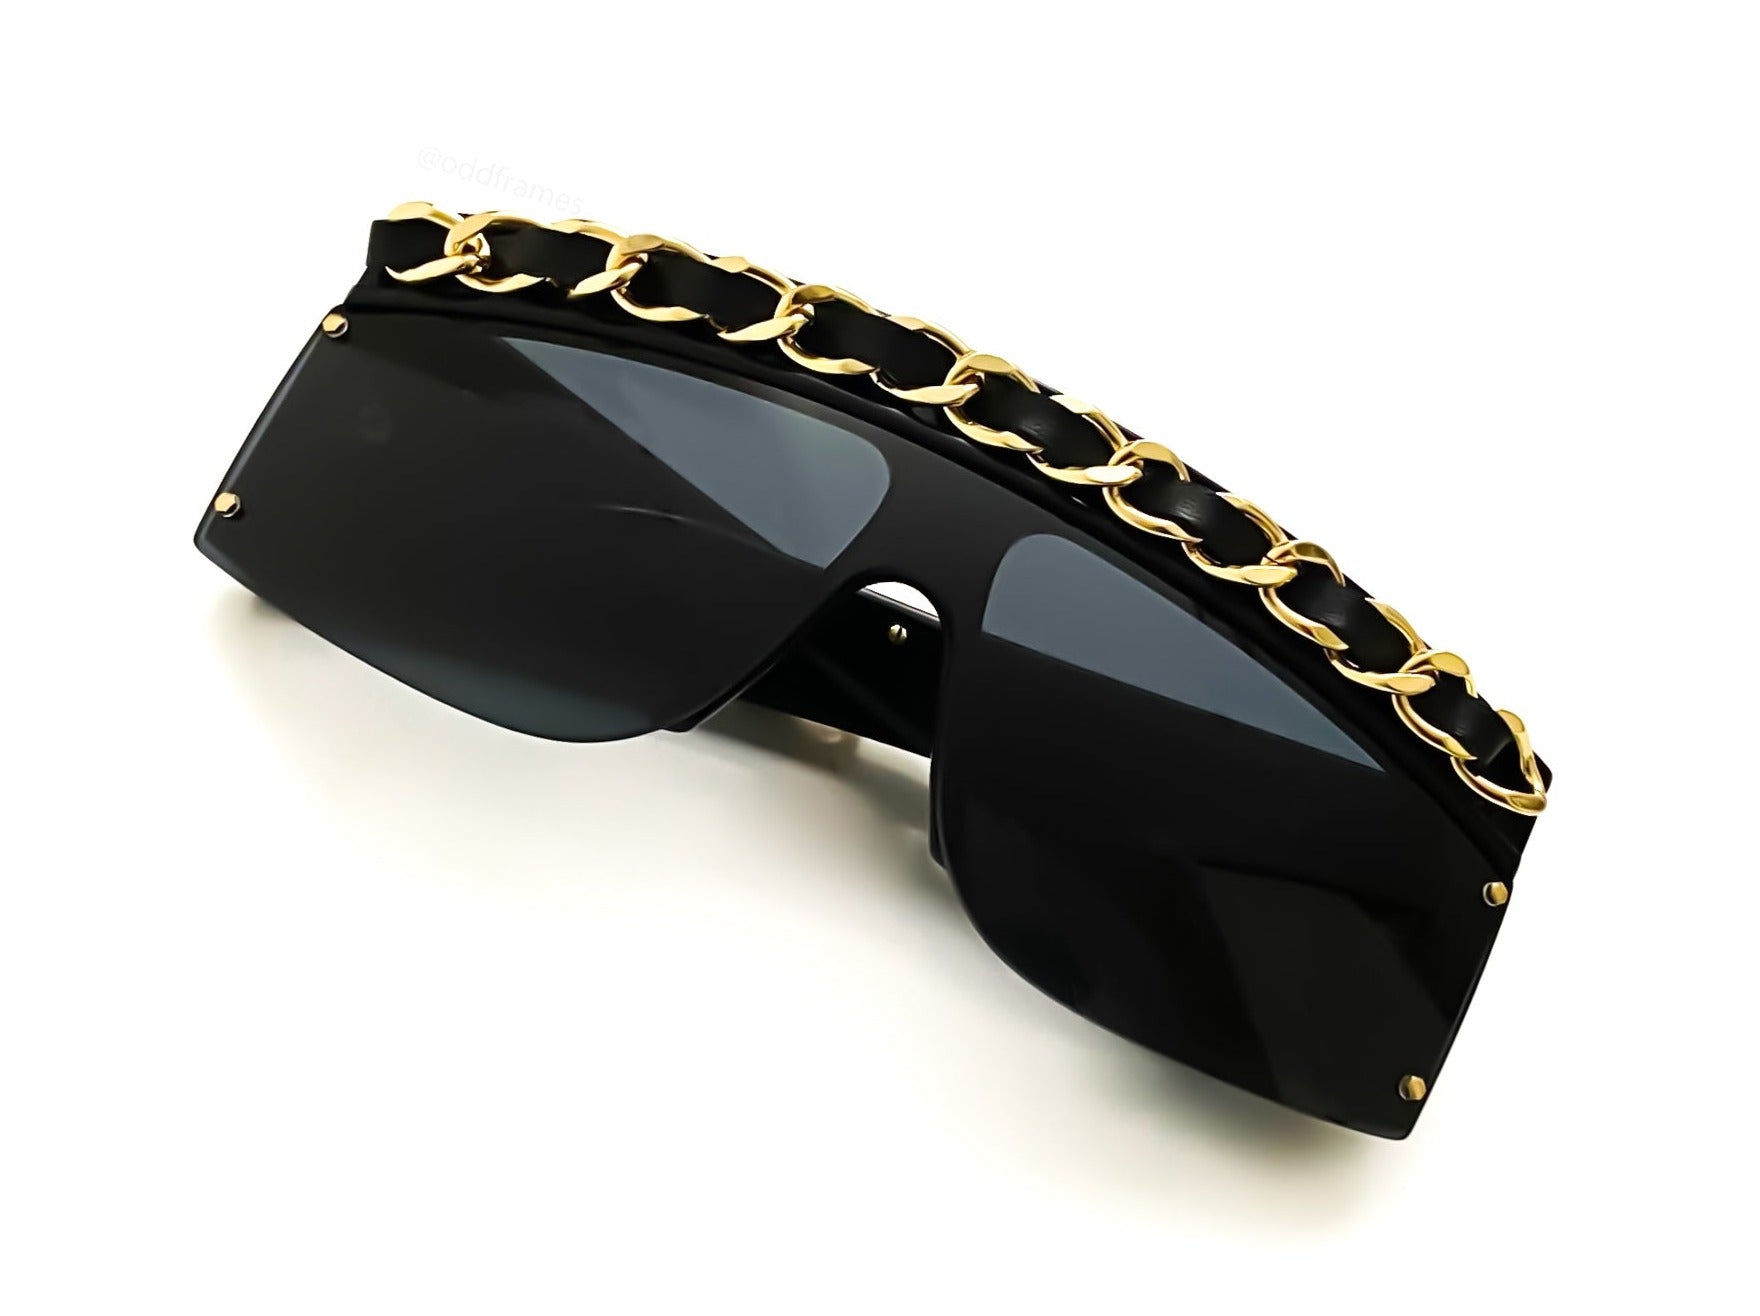 Pre-owned Round Frame Chain Sunglasses In Silver